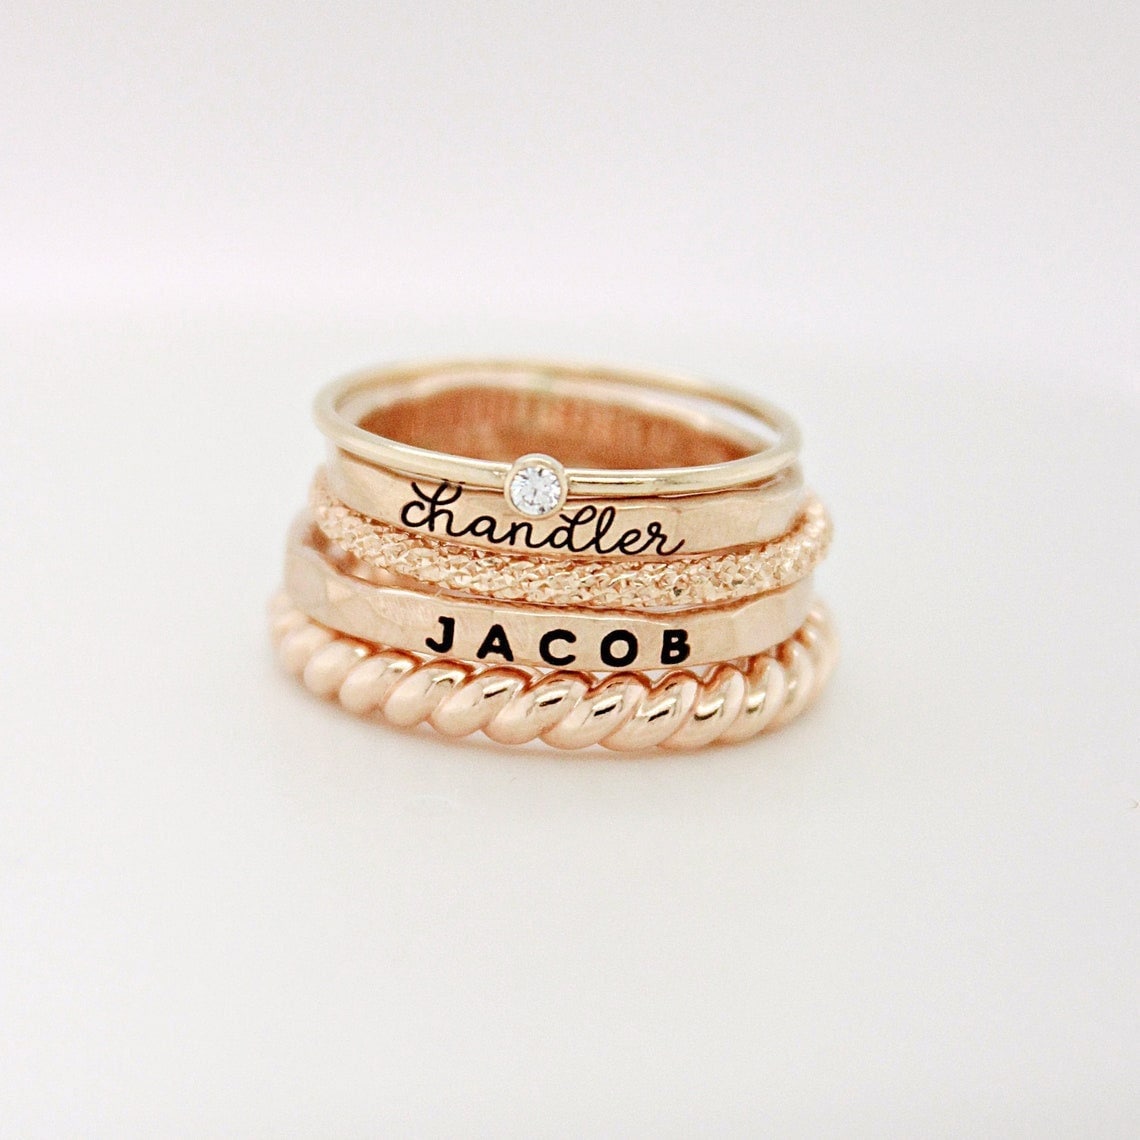 Stackable Ring Set Dainty Name Ring Mother Ring Personalized Ring Sieraden Ringen Stapelbare ringen Stackable Name Ring Stacking Ring Mothers Day Gift Personalize 